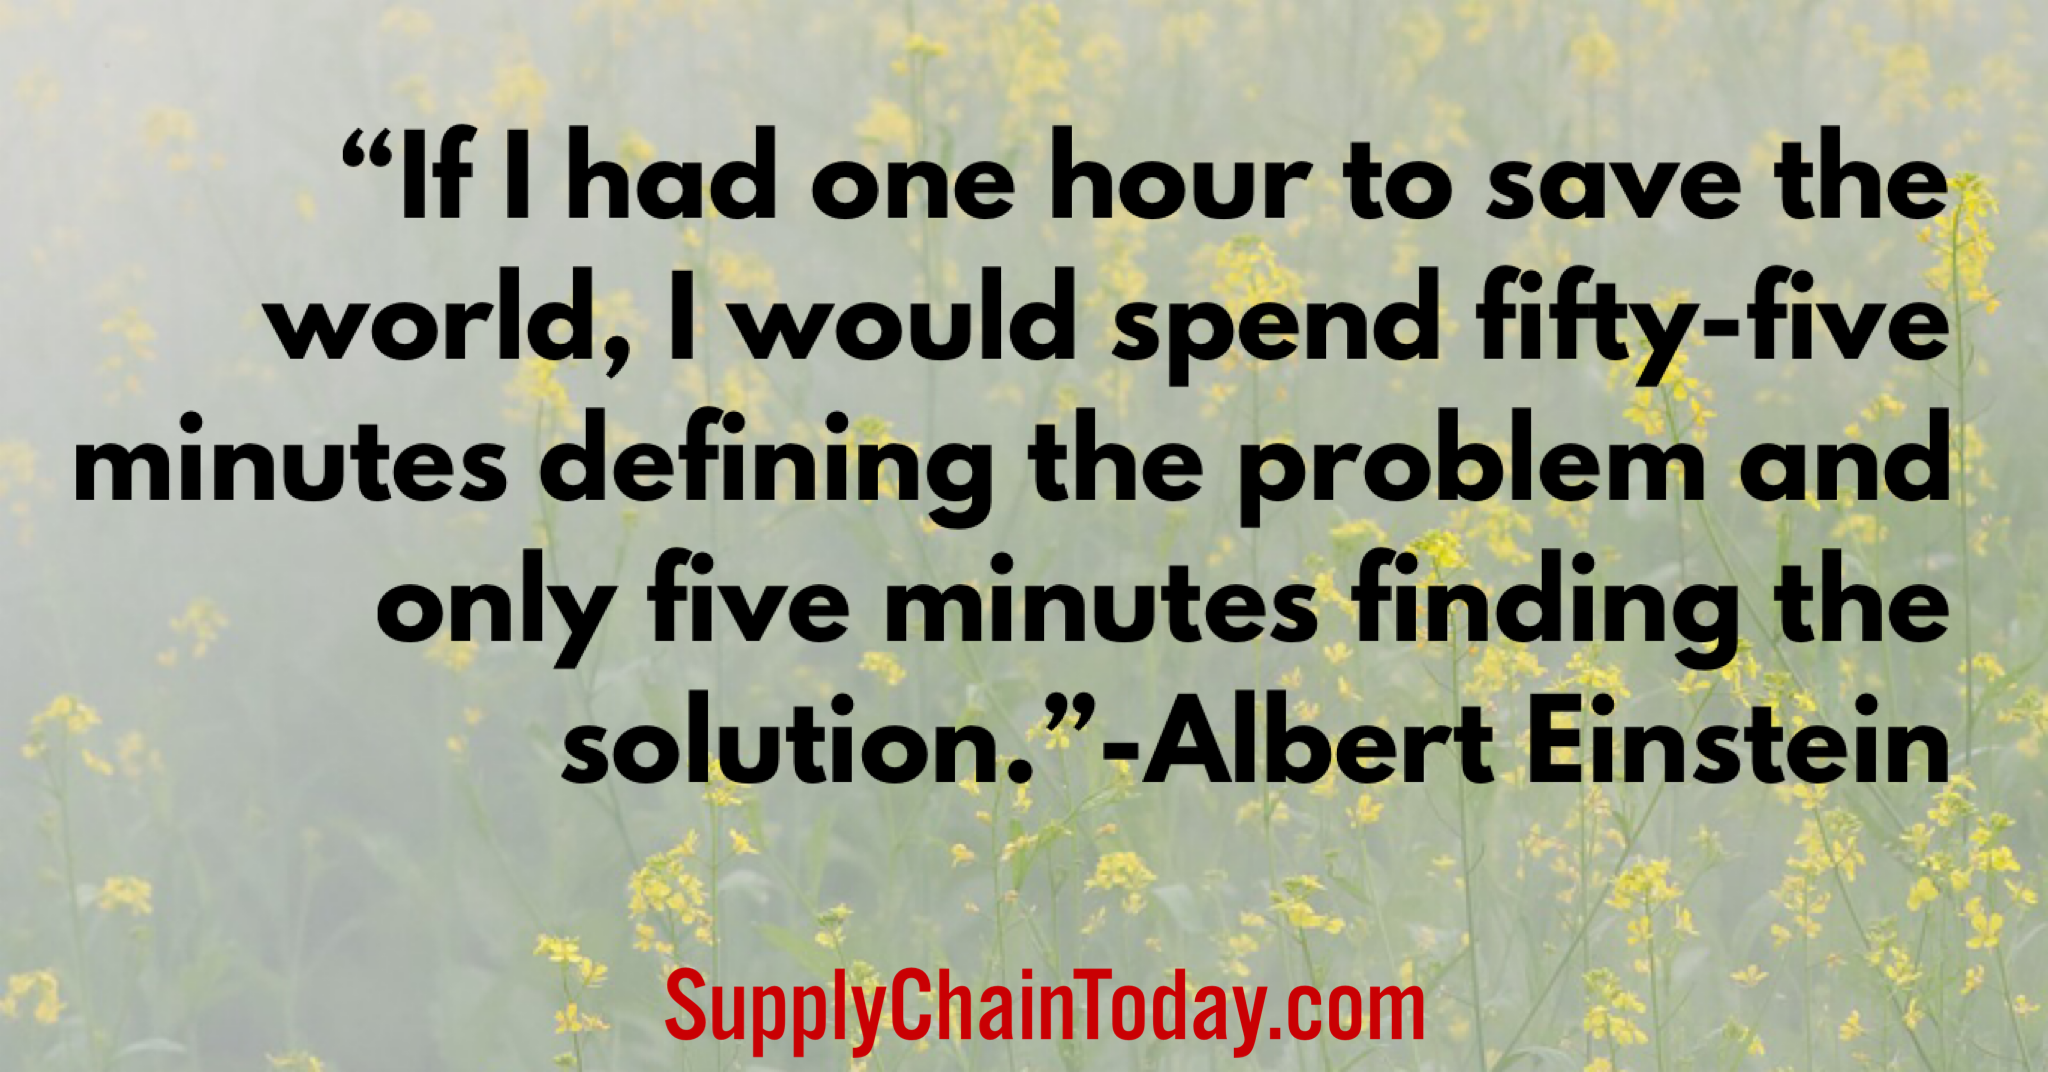 The Best Continuous Improvement Quotes - Supply Chain Today